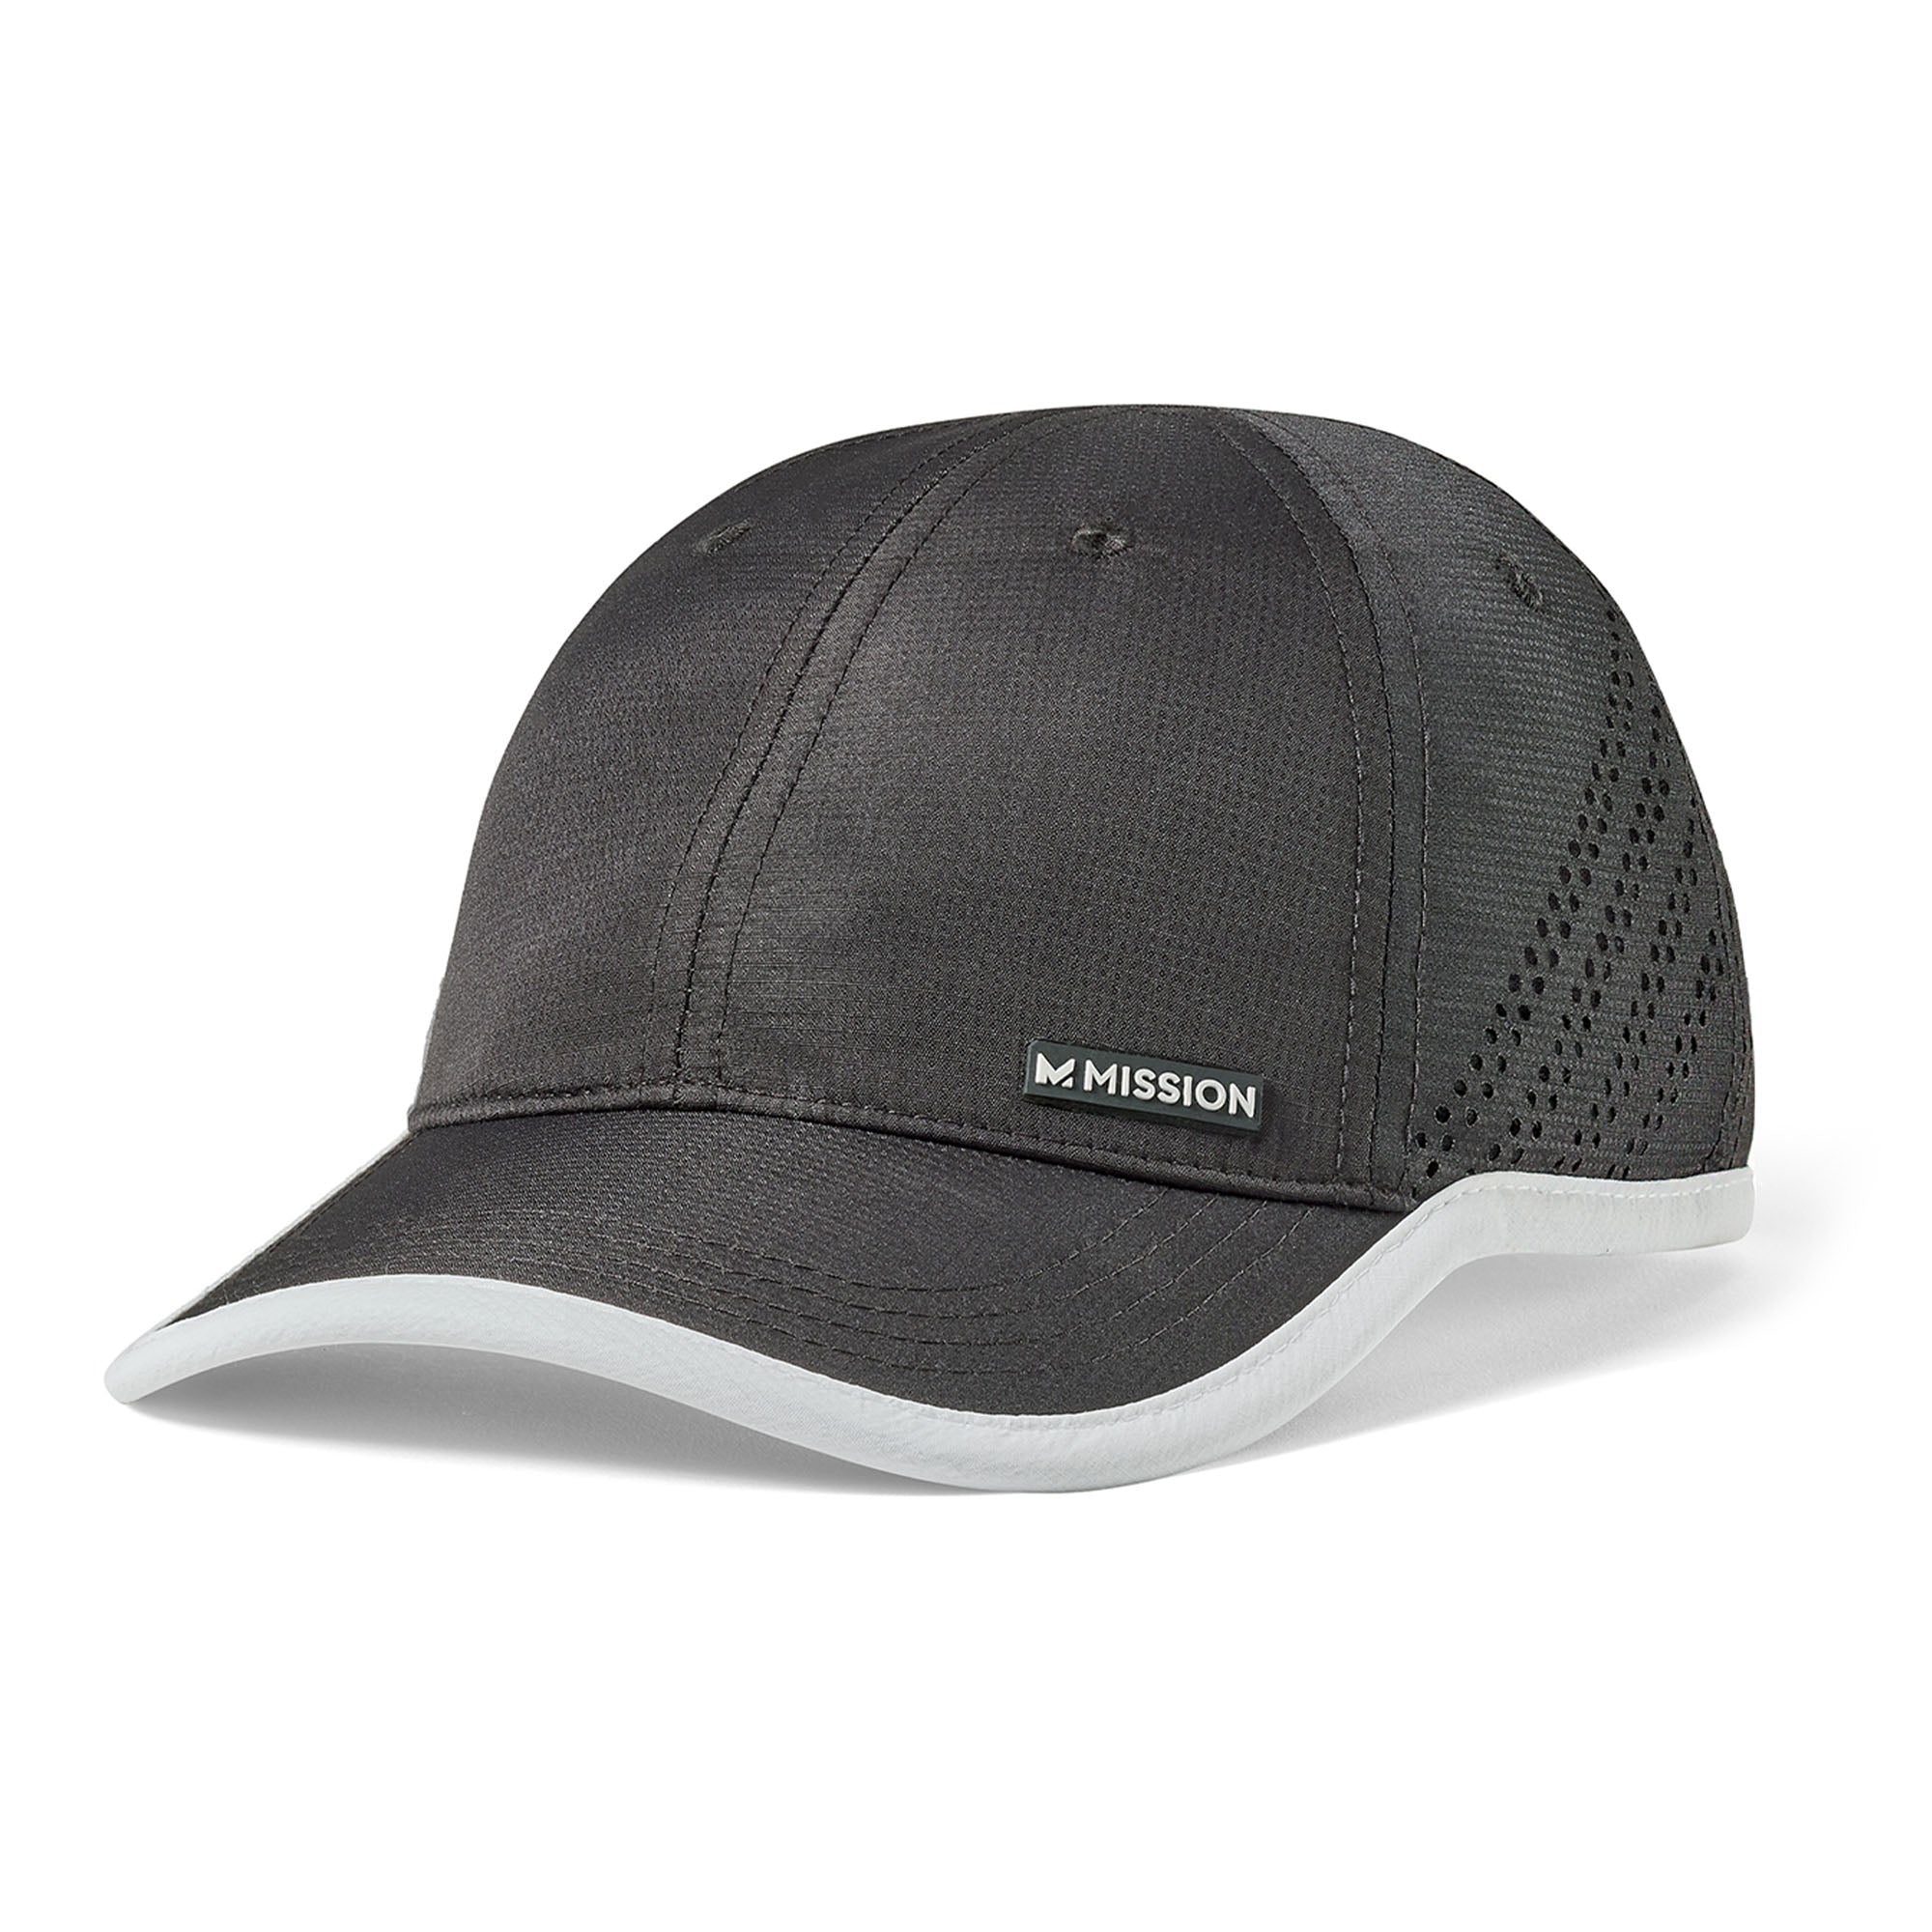 MISSION COOLING VENTED PERFORMANCE APEX HAT One Size Fits Most NEW